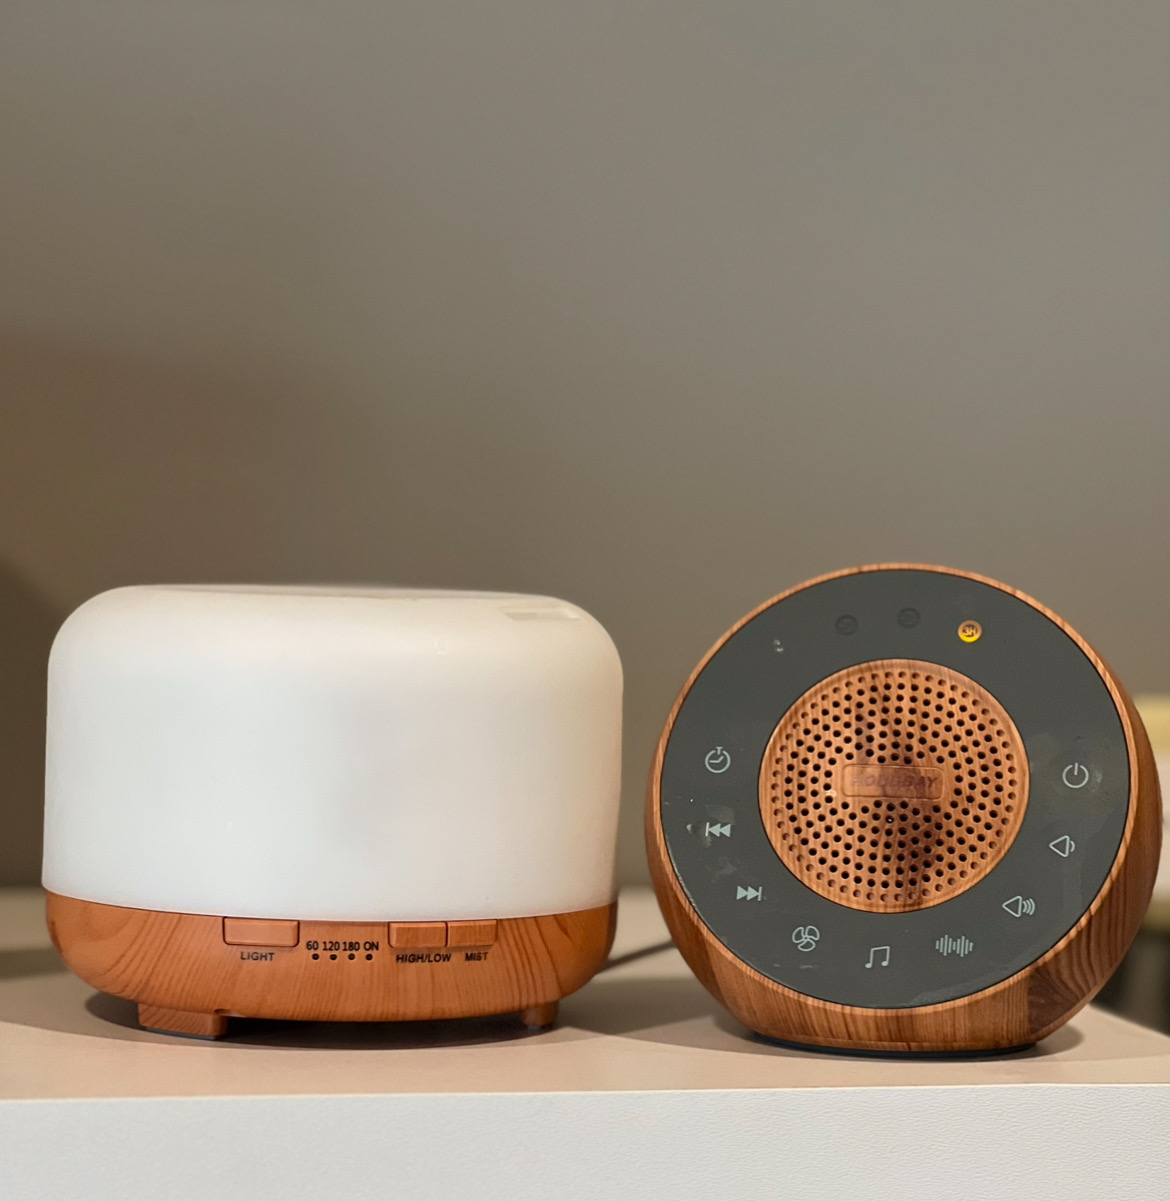 White essential oil diffuser with a wooden bottom, wooden circular sound machine with a grey interior housing buttons for different sounds.